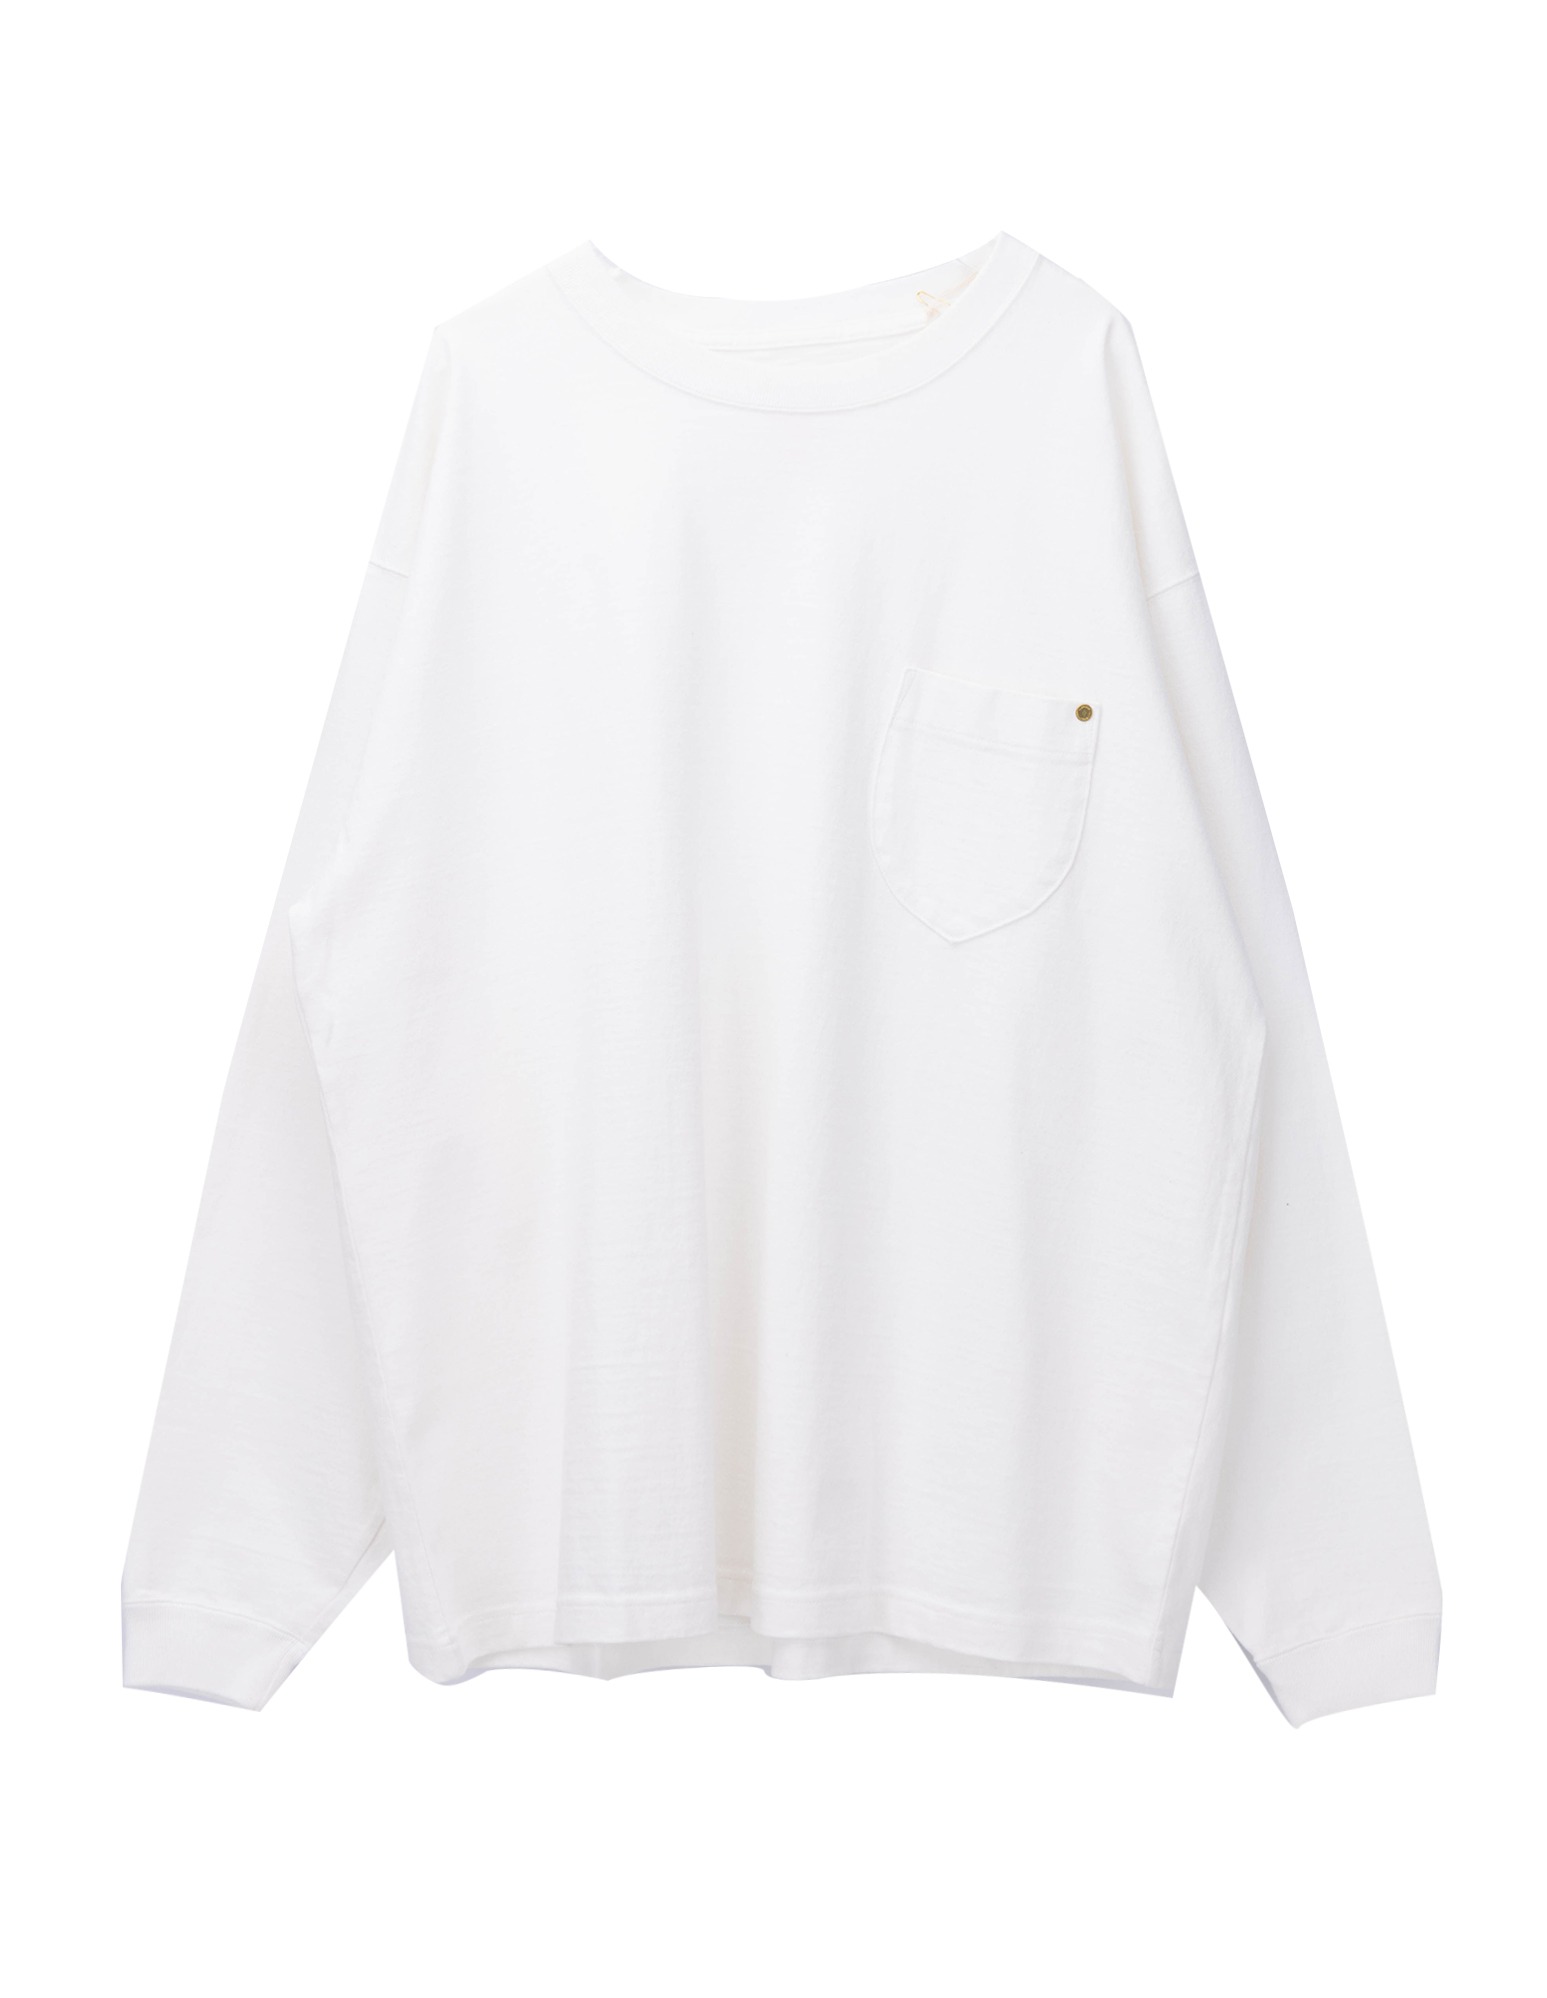 NM-TS04 STANDARD HEAVY WEIGHT L/S T-S (White)